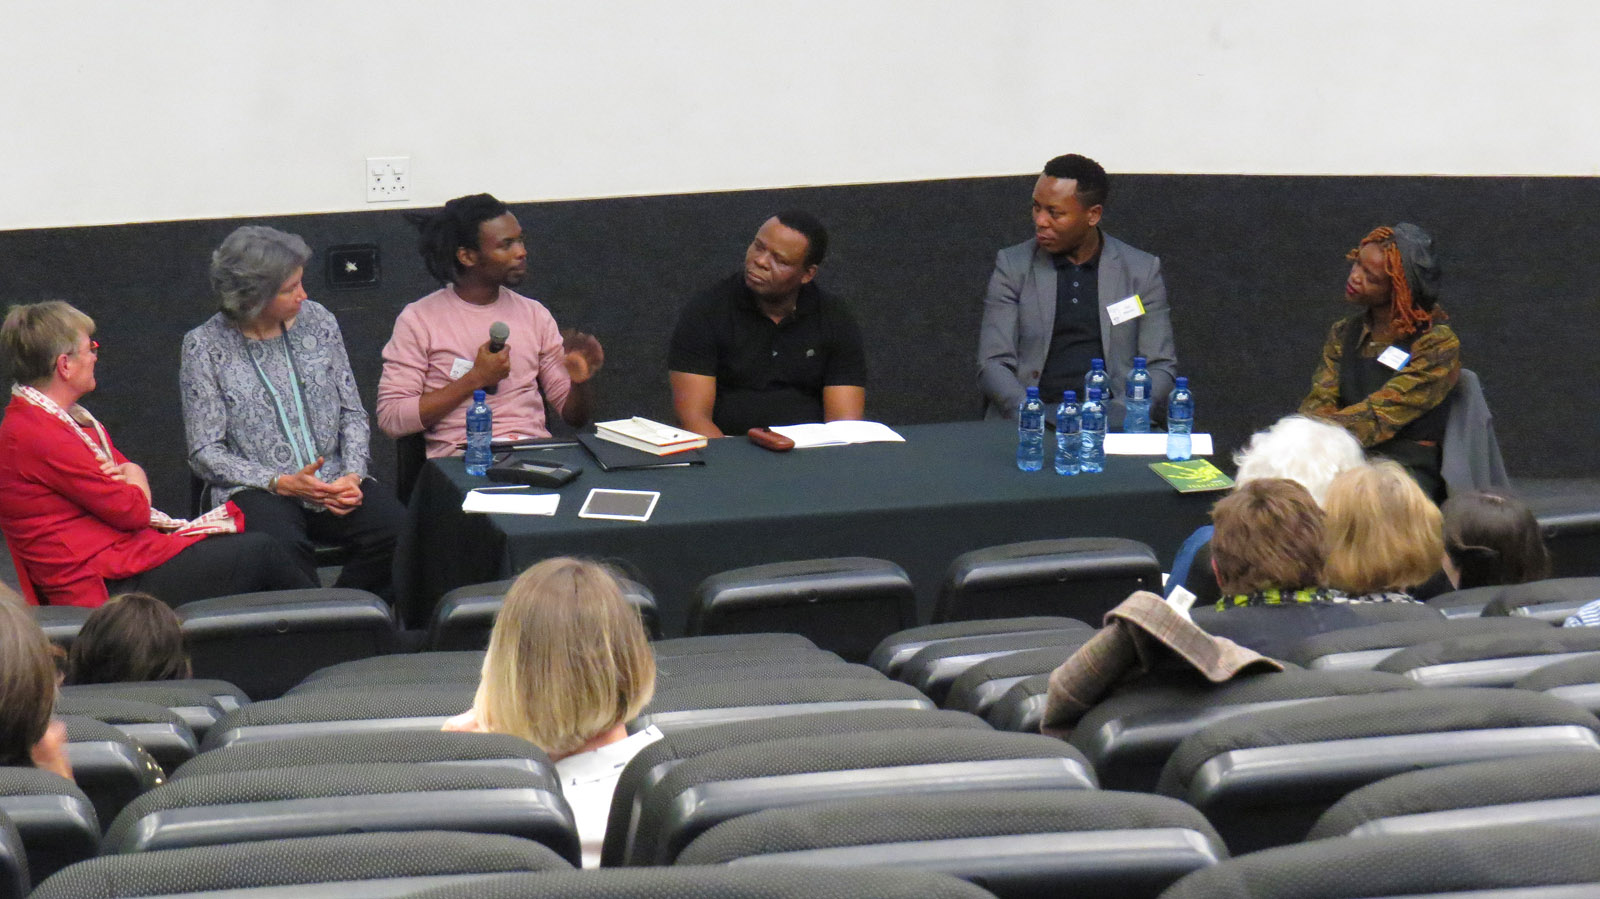 Click the image for a view of: Muzi Gigaba speaking at the roundtable: South African book arts as a democratic force. Sunday 26 March